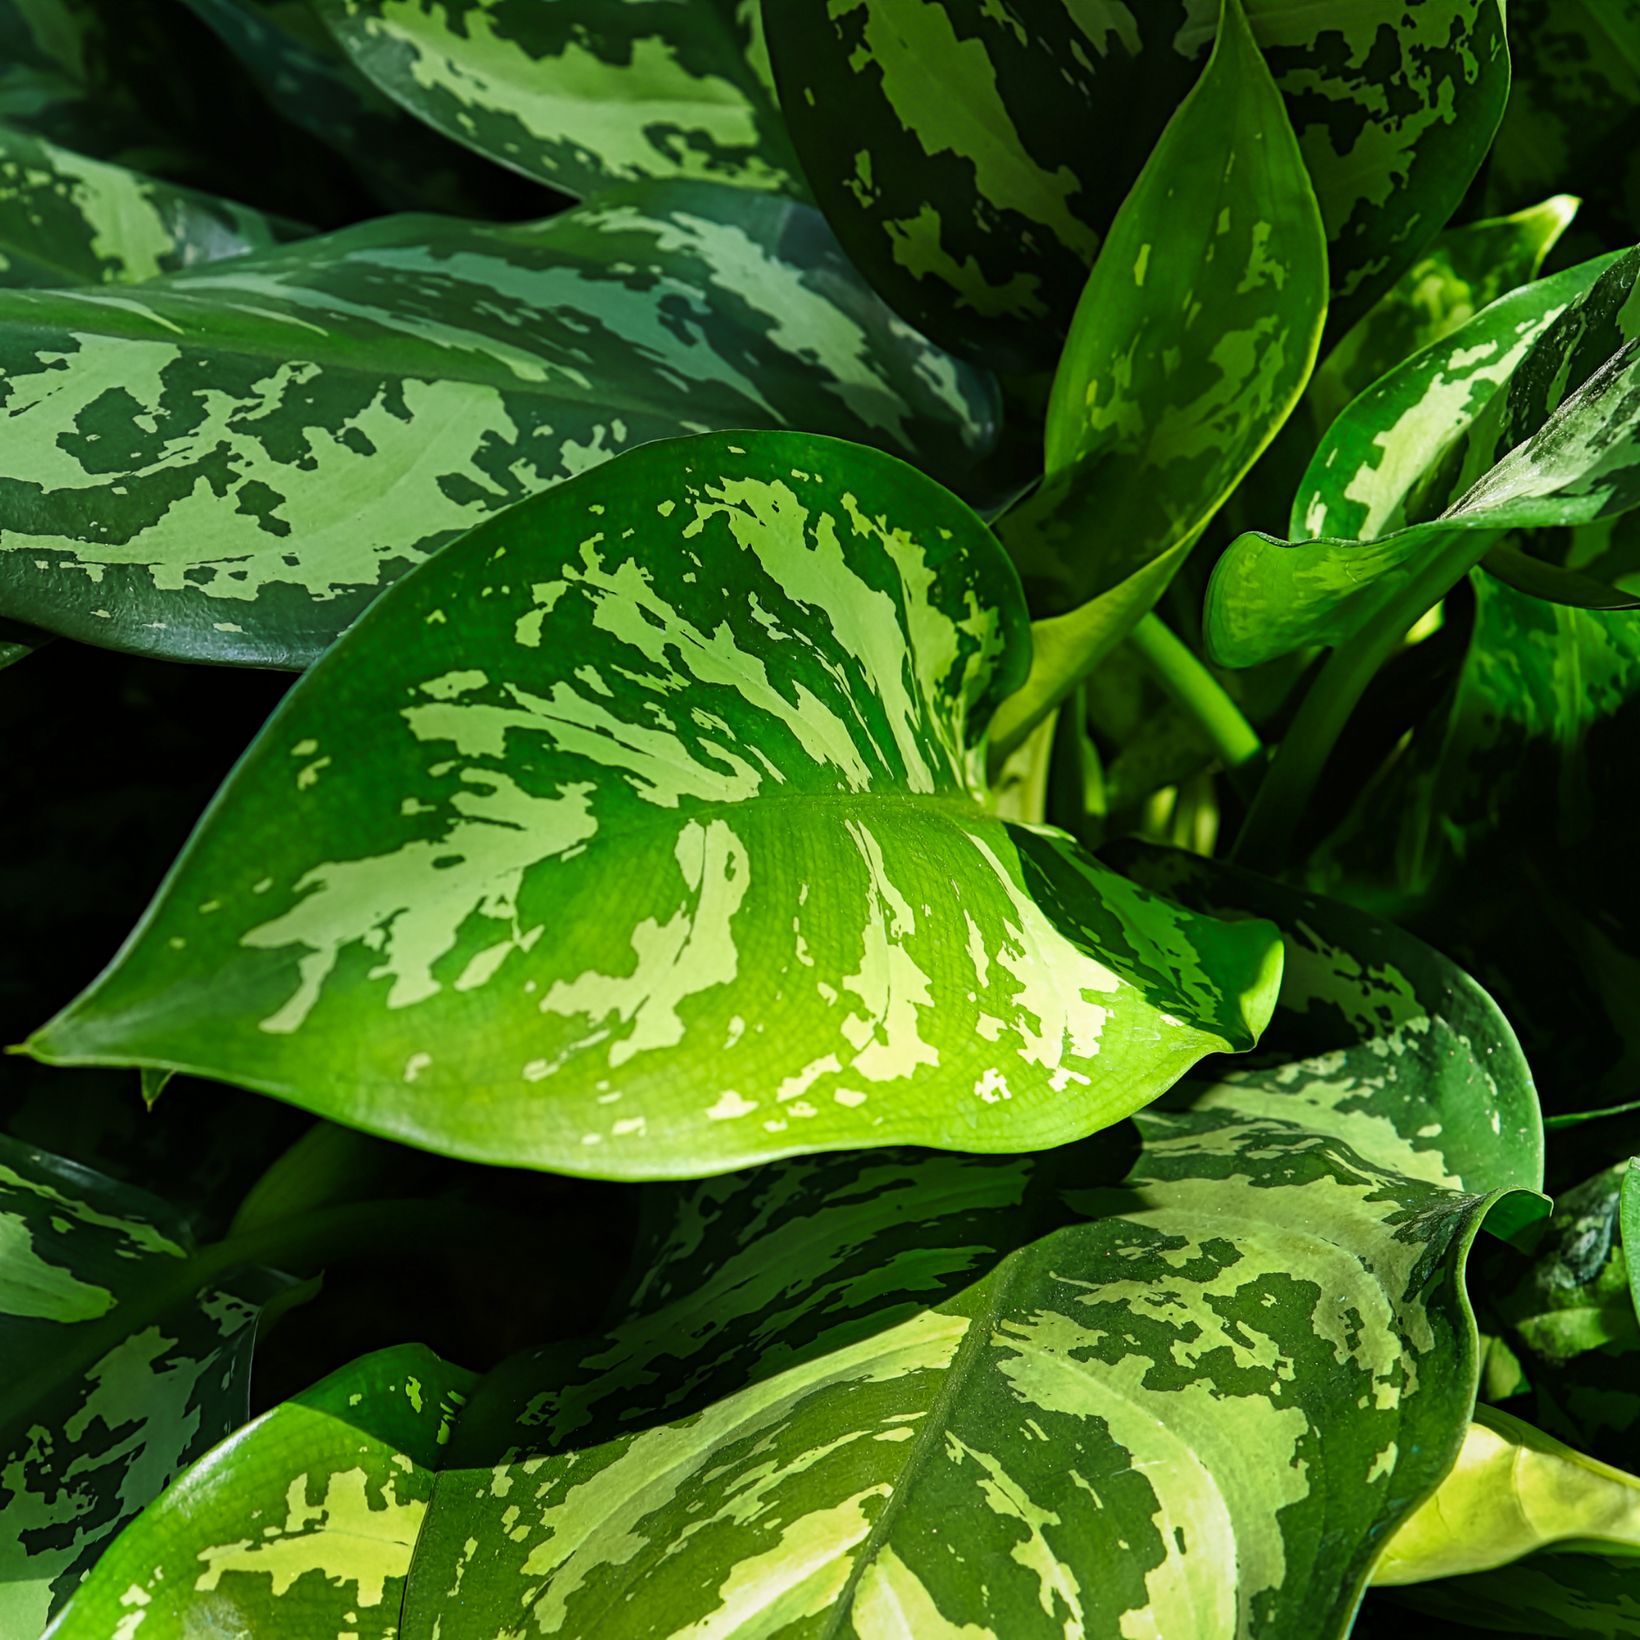 Chinese Evergreen up close. Notice the detail in its leaves. 